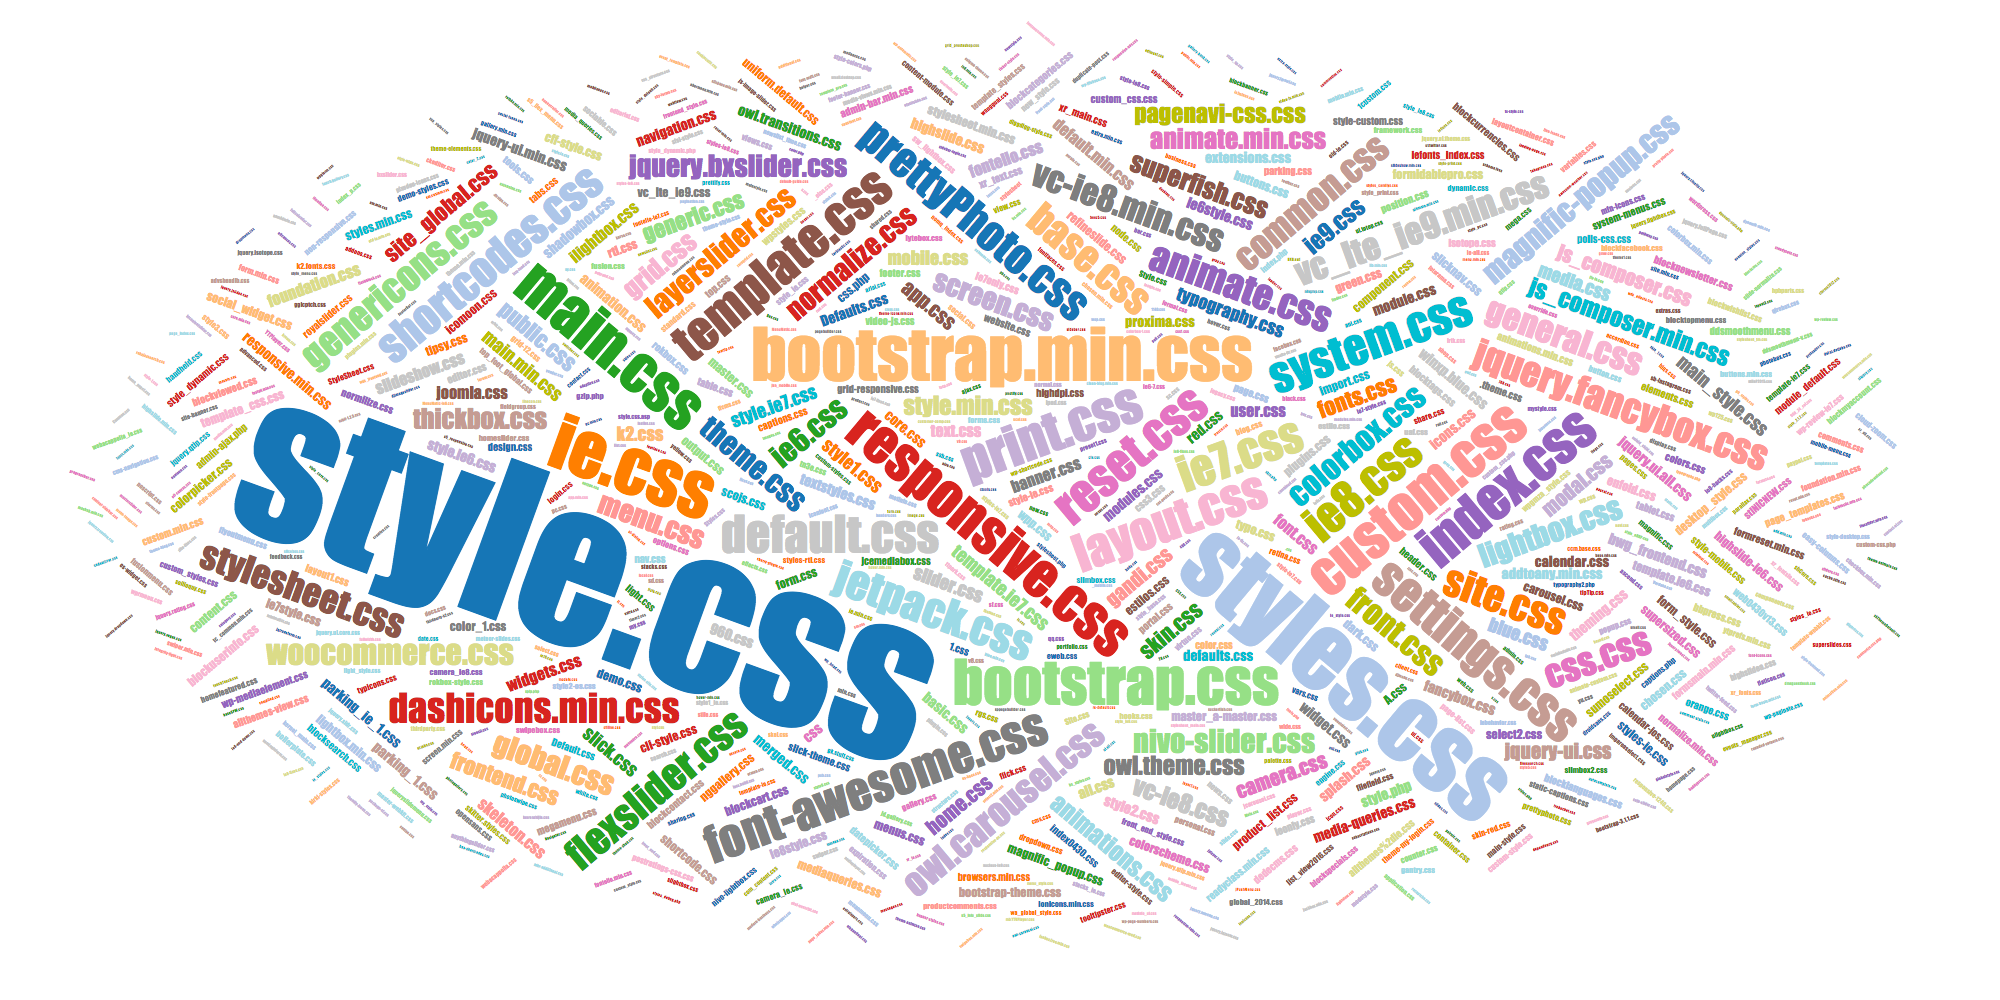 Popular names of CSS files v3.css, vc_lte_ie9.min.css, etc.